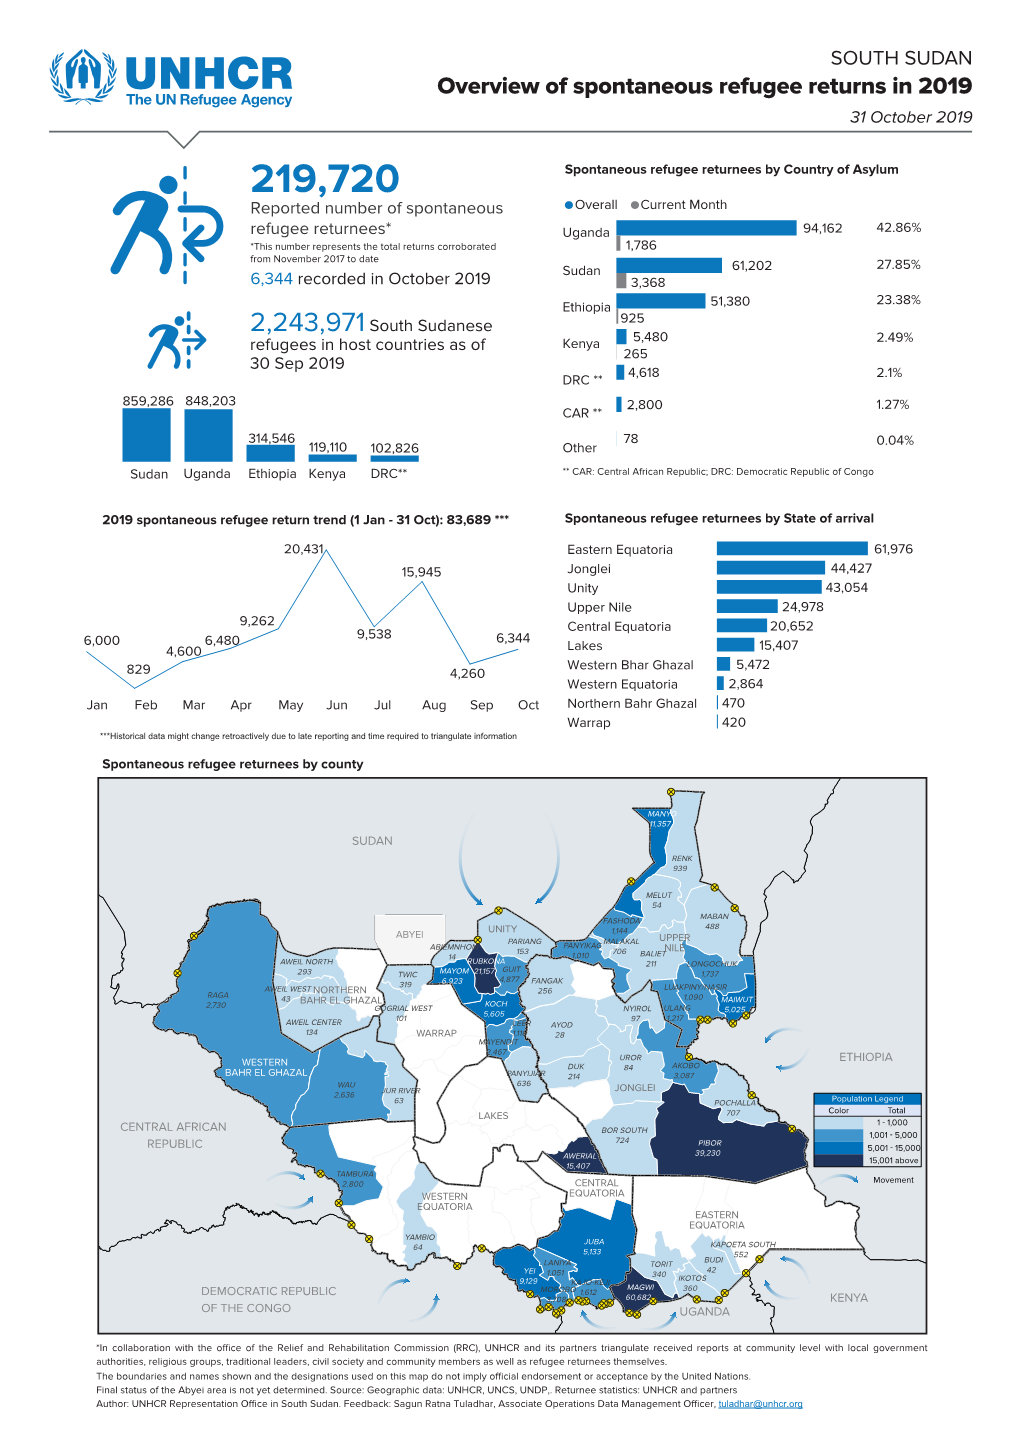 Overview of Spontaneous Refugee Returns in 2019